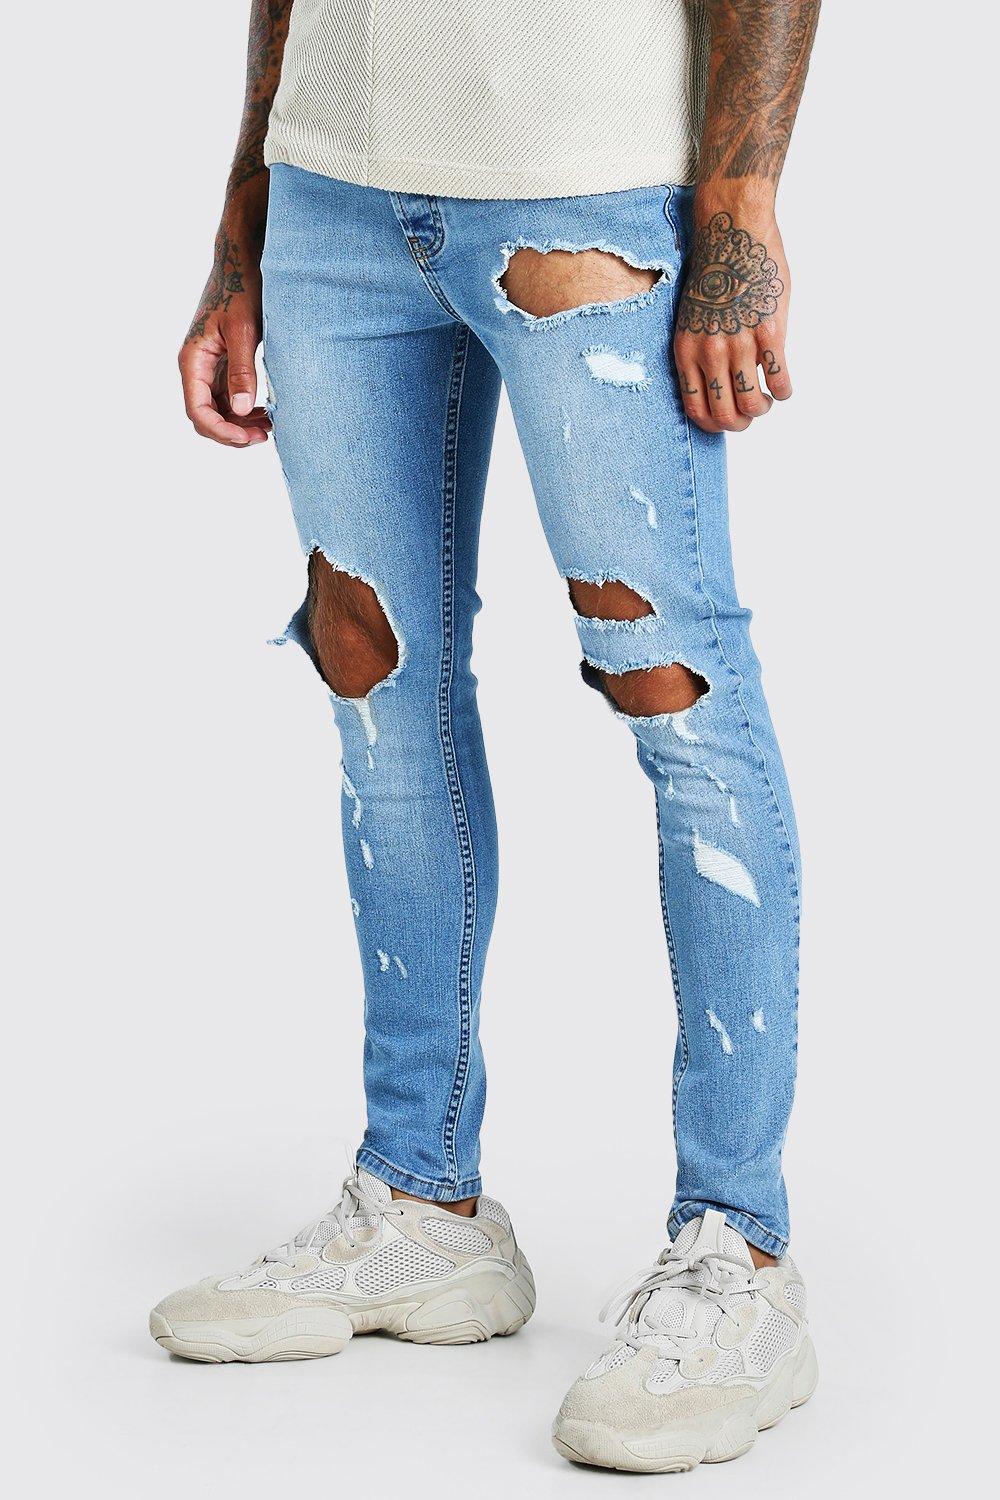 all over ripped jeans